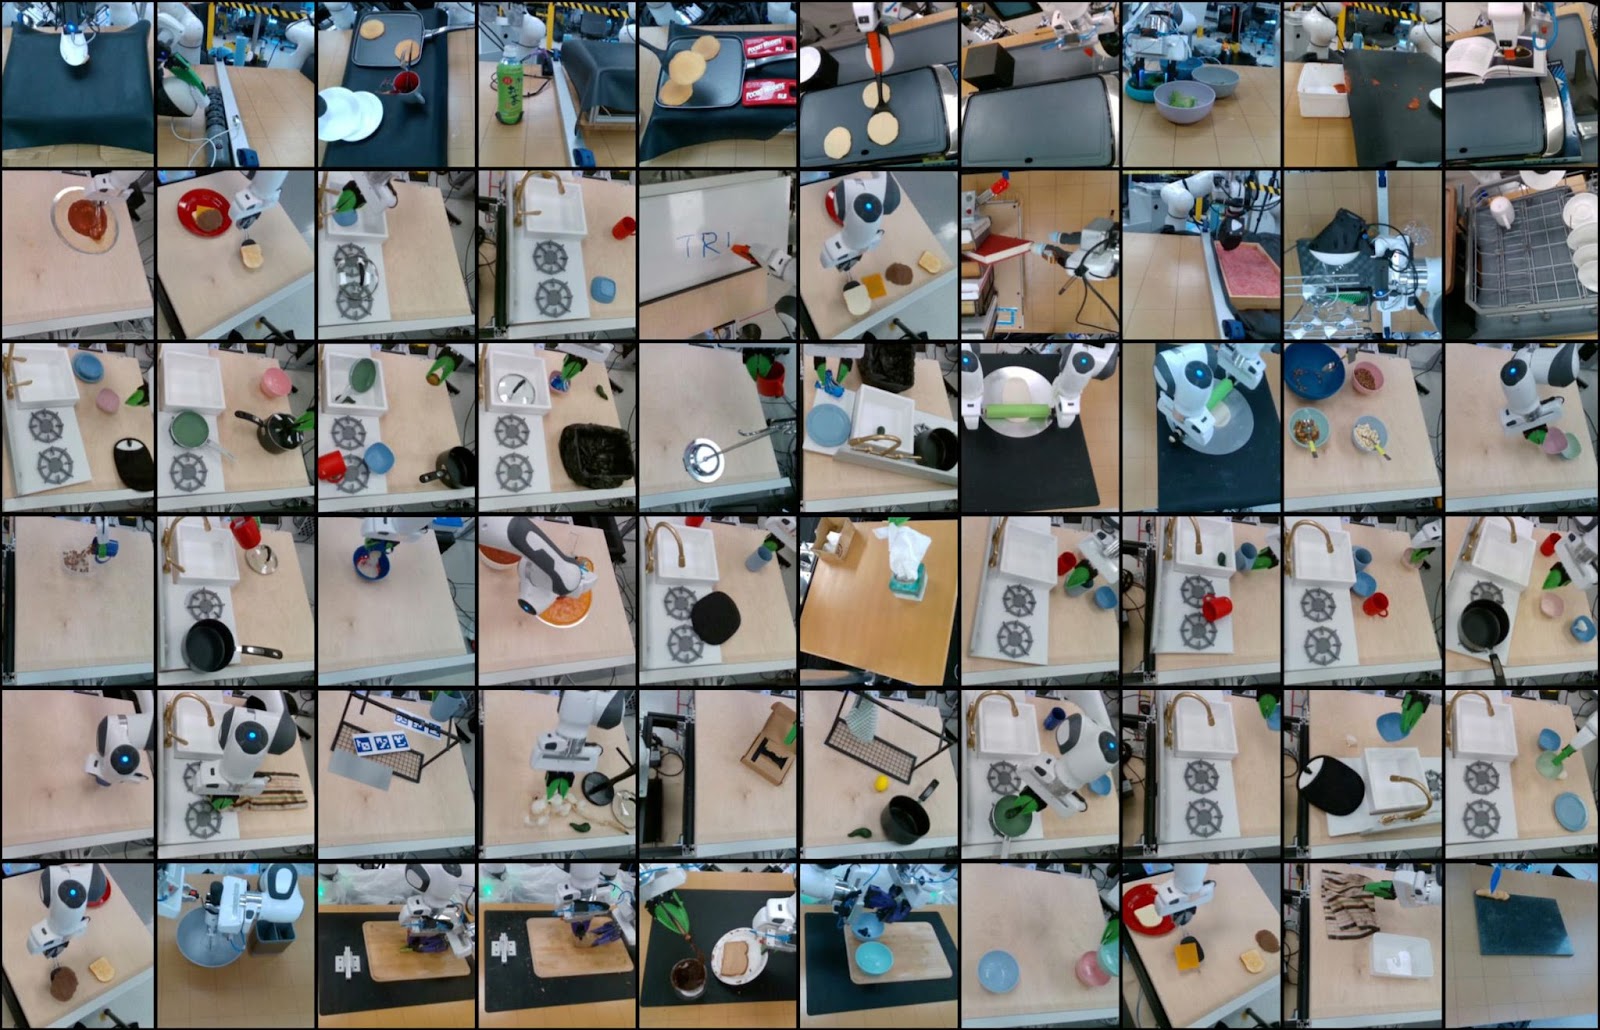 a grid showing the 60 tasks TRI has taught its robots